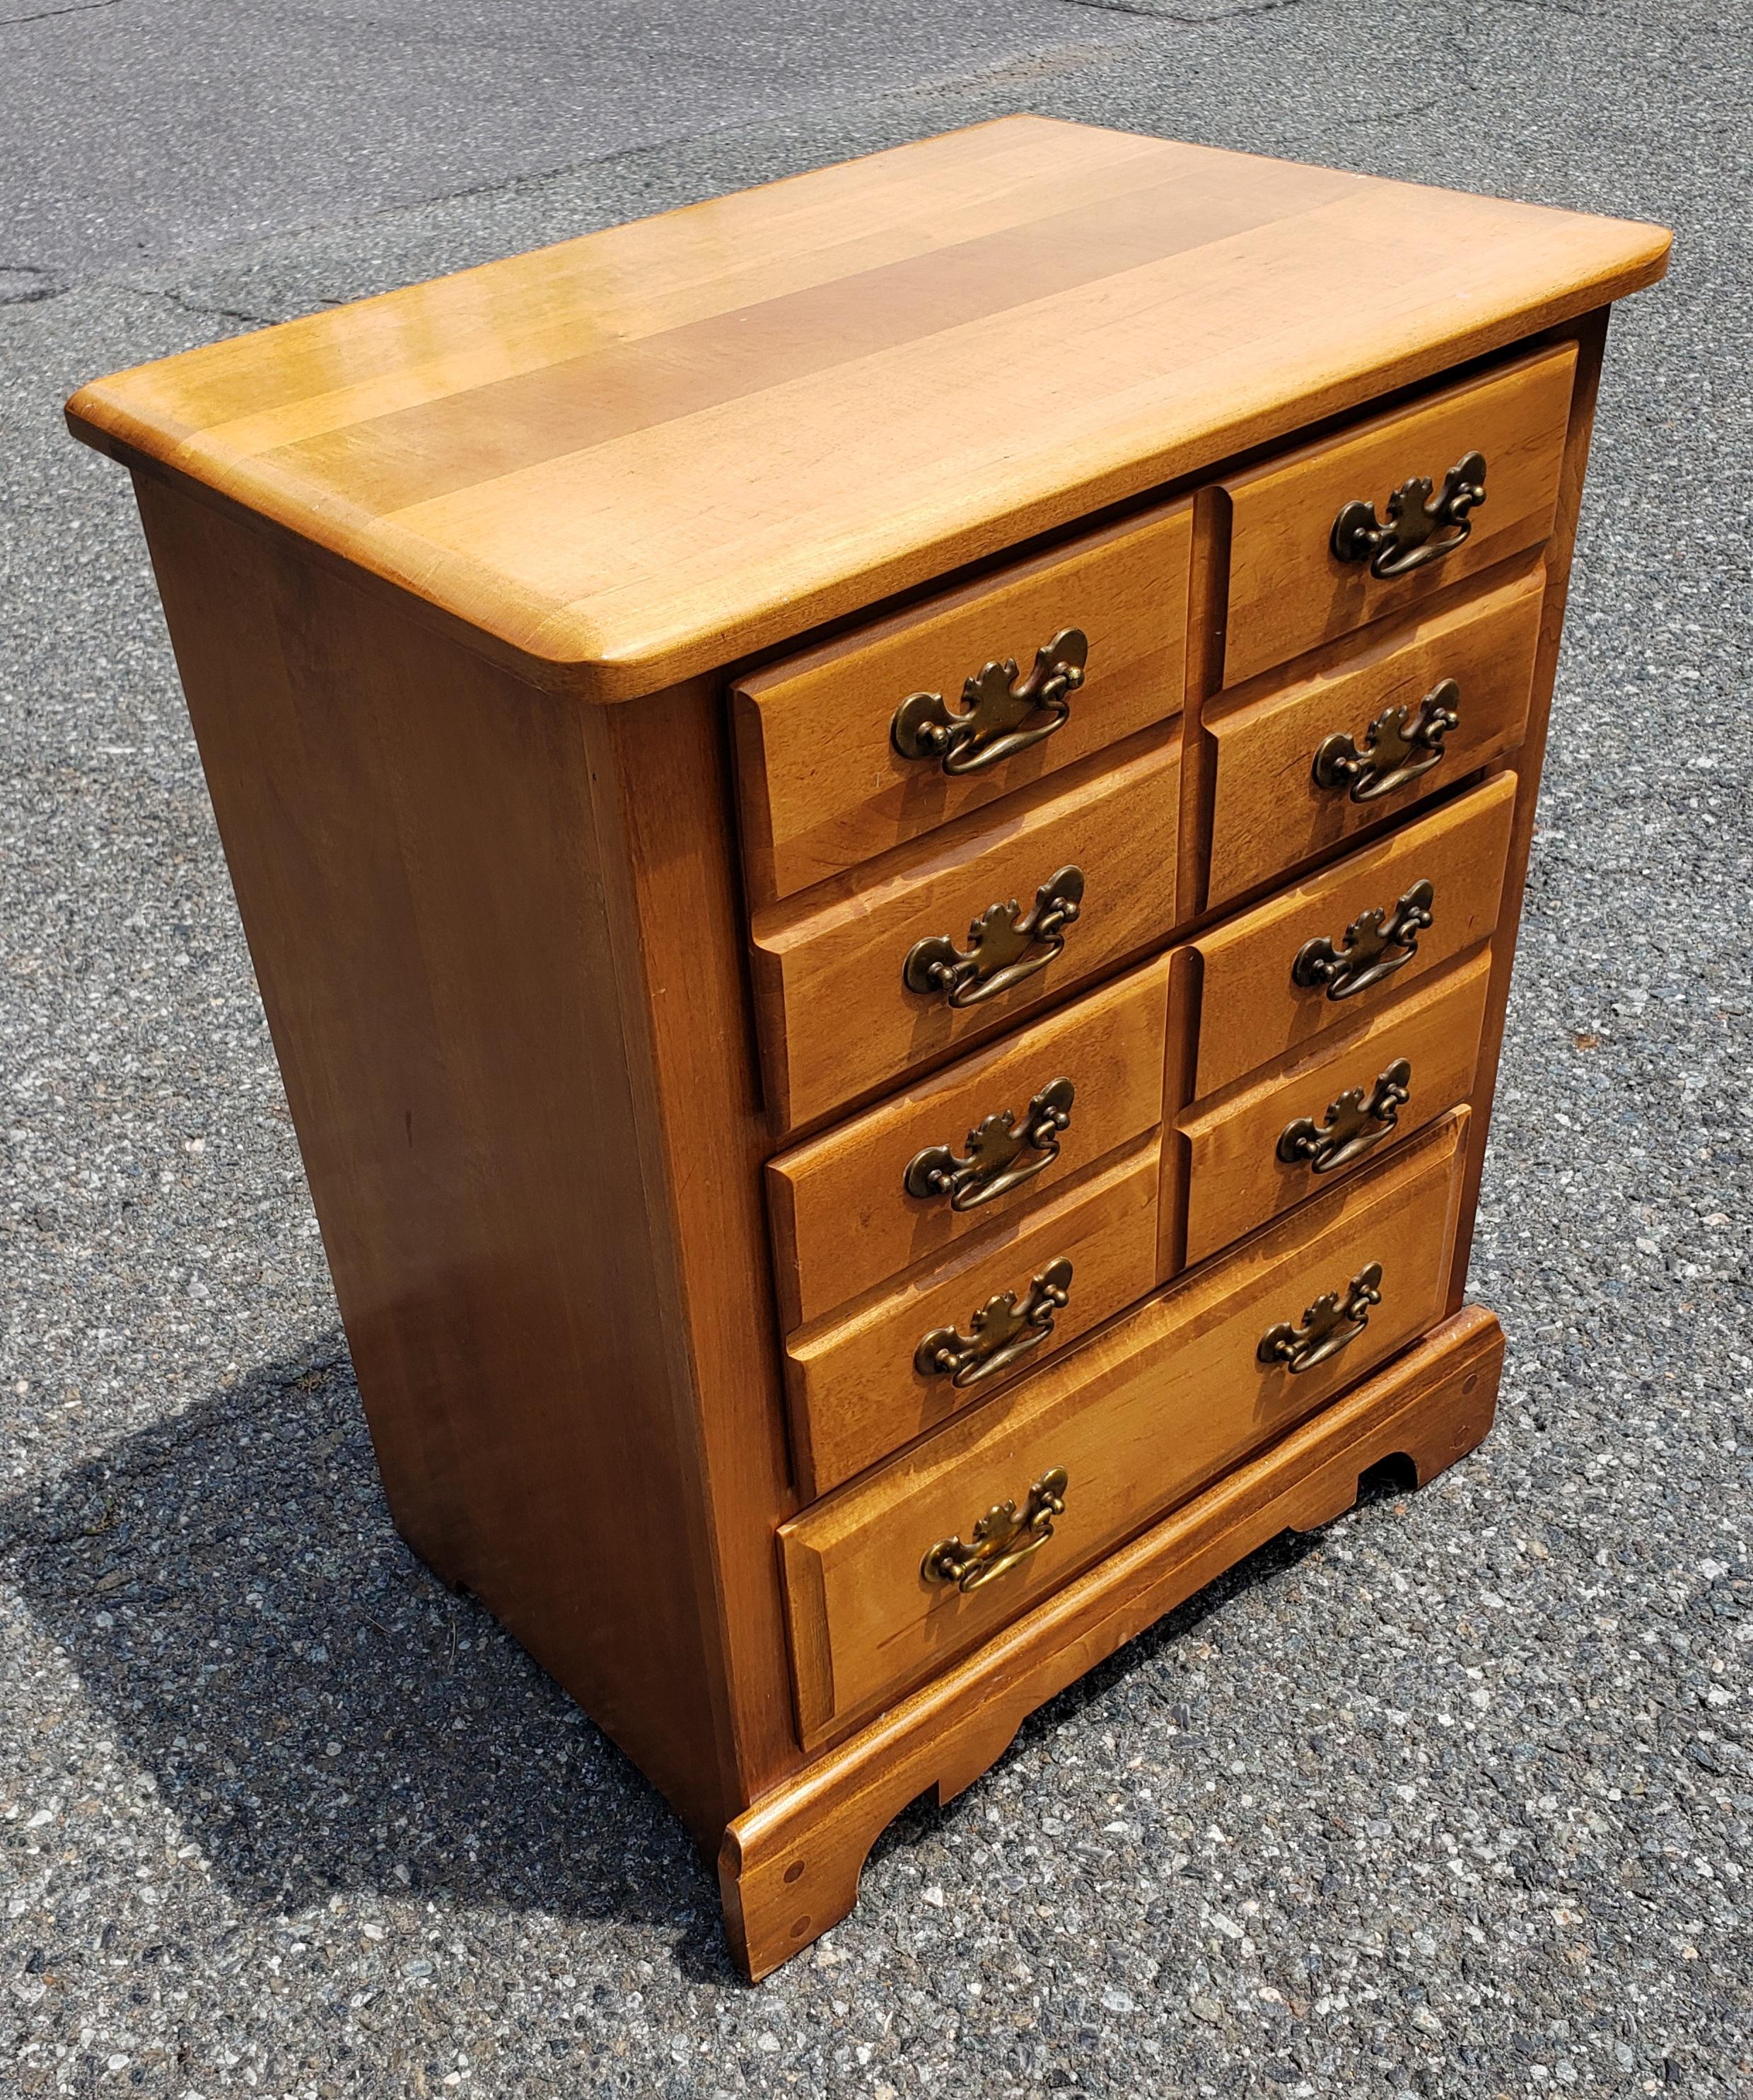 A Mid-Century  Chippendale 3-Drawer Solid wild Cherry Side Chest by Forest Furniture. Recently refinished and in great condition. Dovetailed drawers. Measures 22